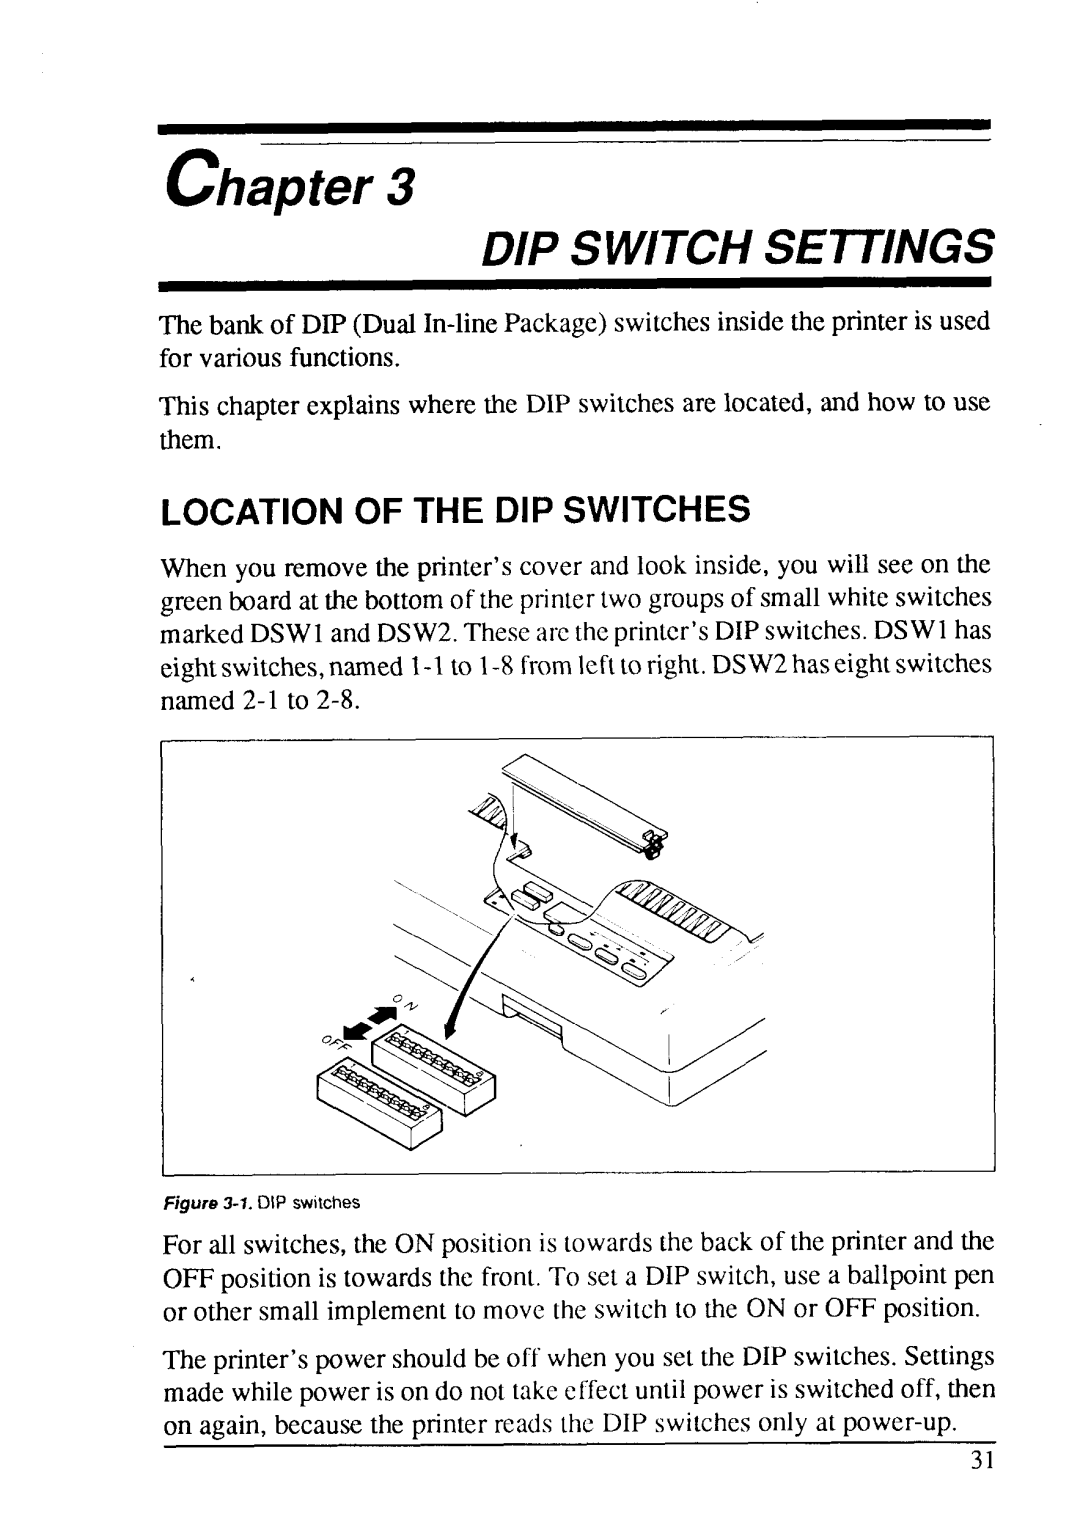 Star Micronics LC24-15 user manual D/P Switch Settings, Location Of The Dip Switches, Chapter 